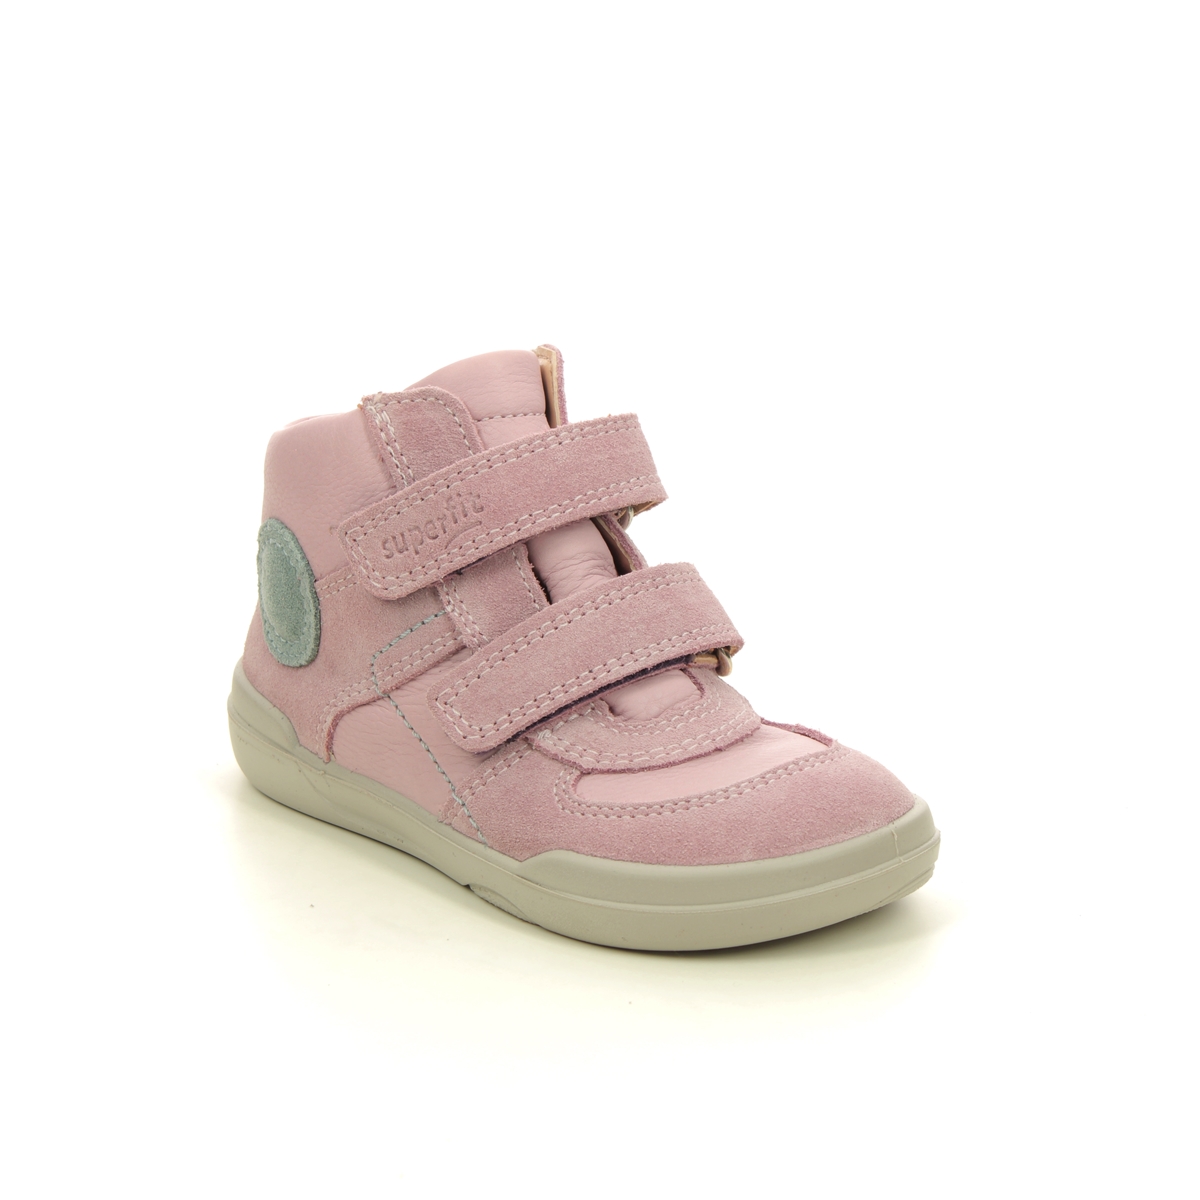 Superfit Superfree Gtx Pink suede Kids Toddler Girls Boots 1000541-5500 in a Plain Leather in Size 25